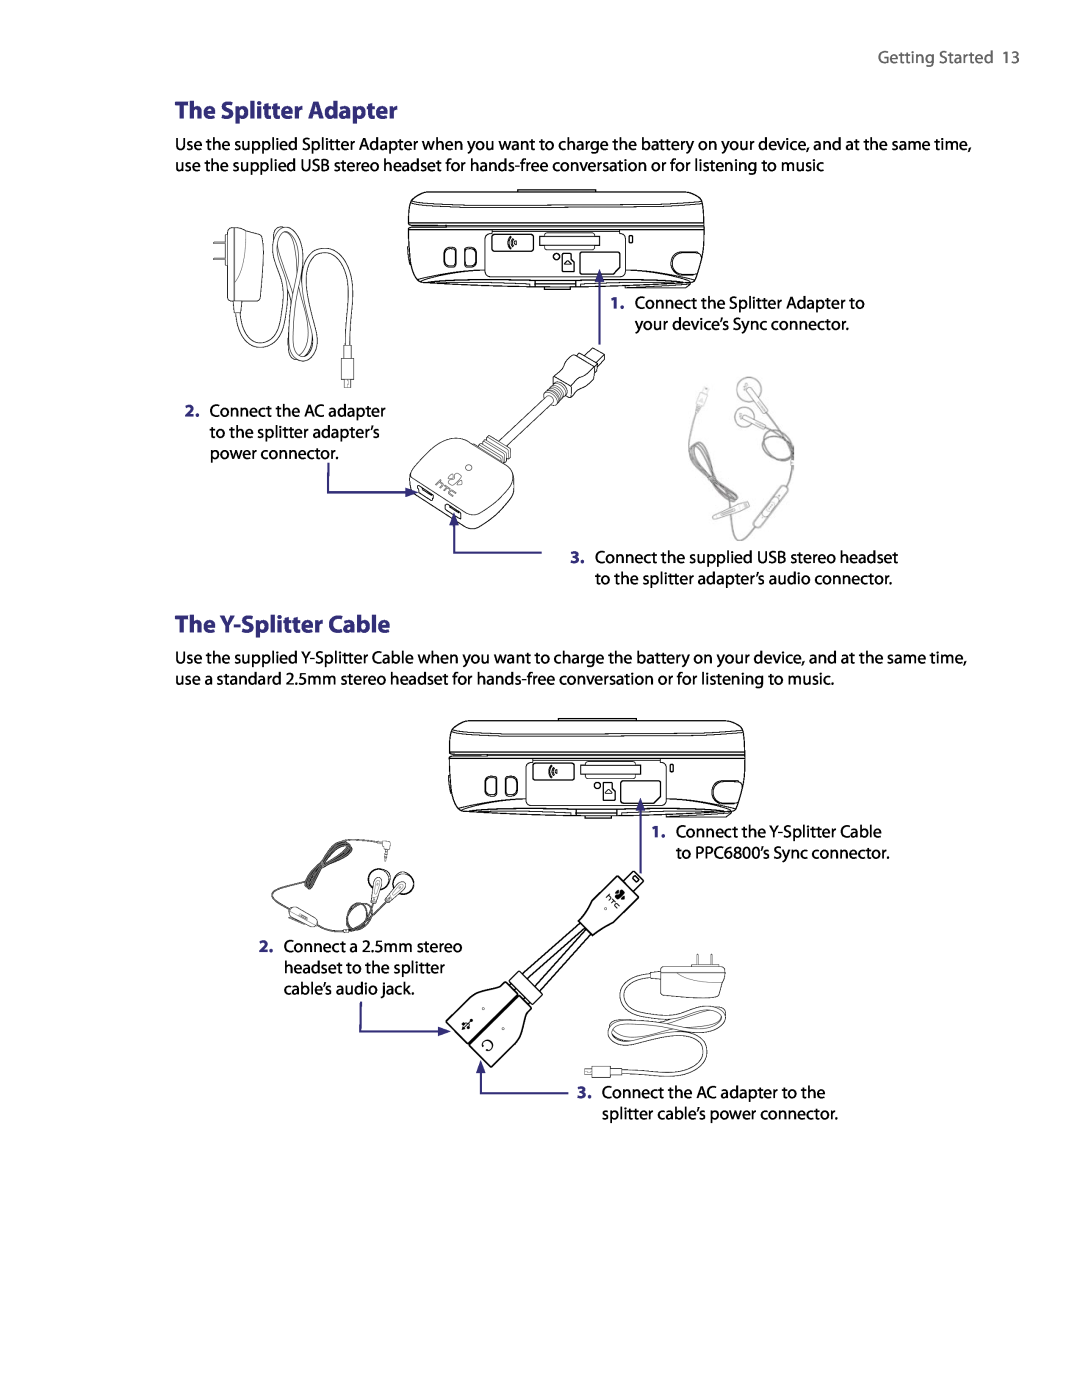 HTC PDA Phone user manual The Splitter Adapter, The Y-Splitter Cable, Getting Started 